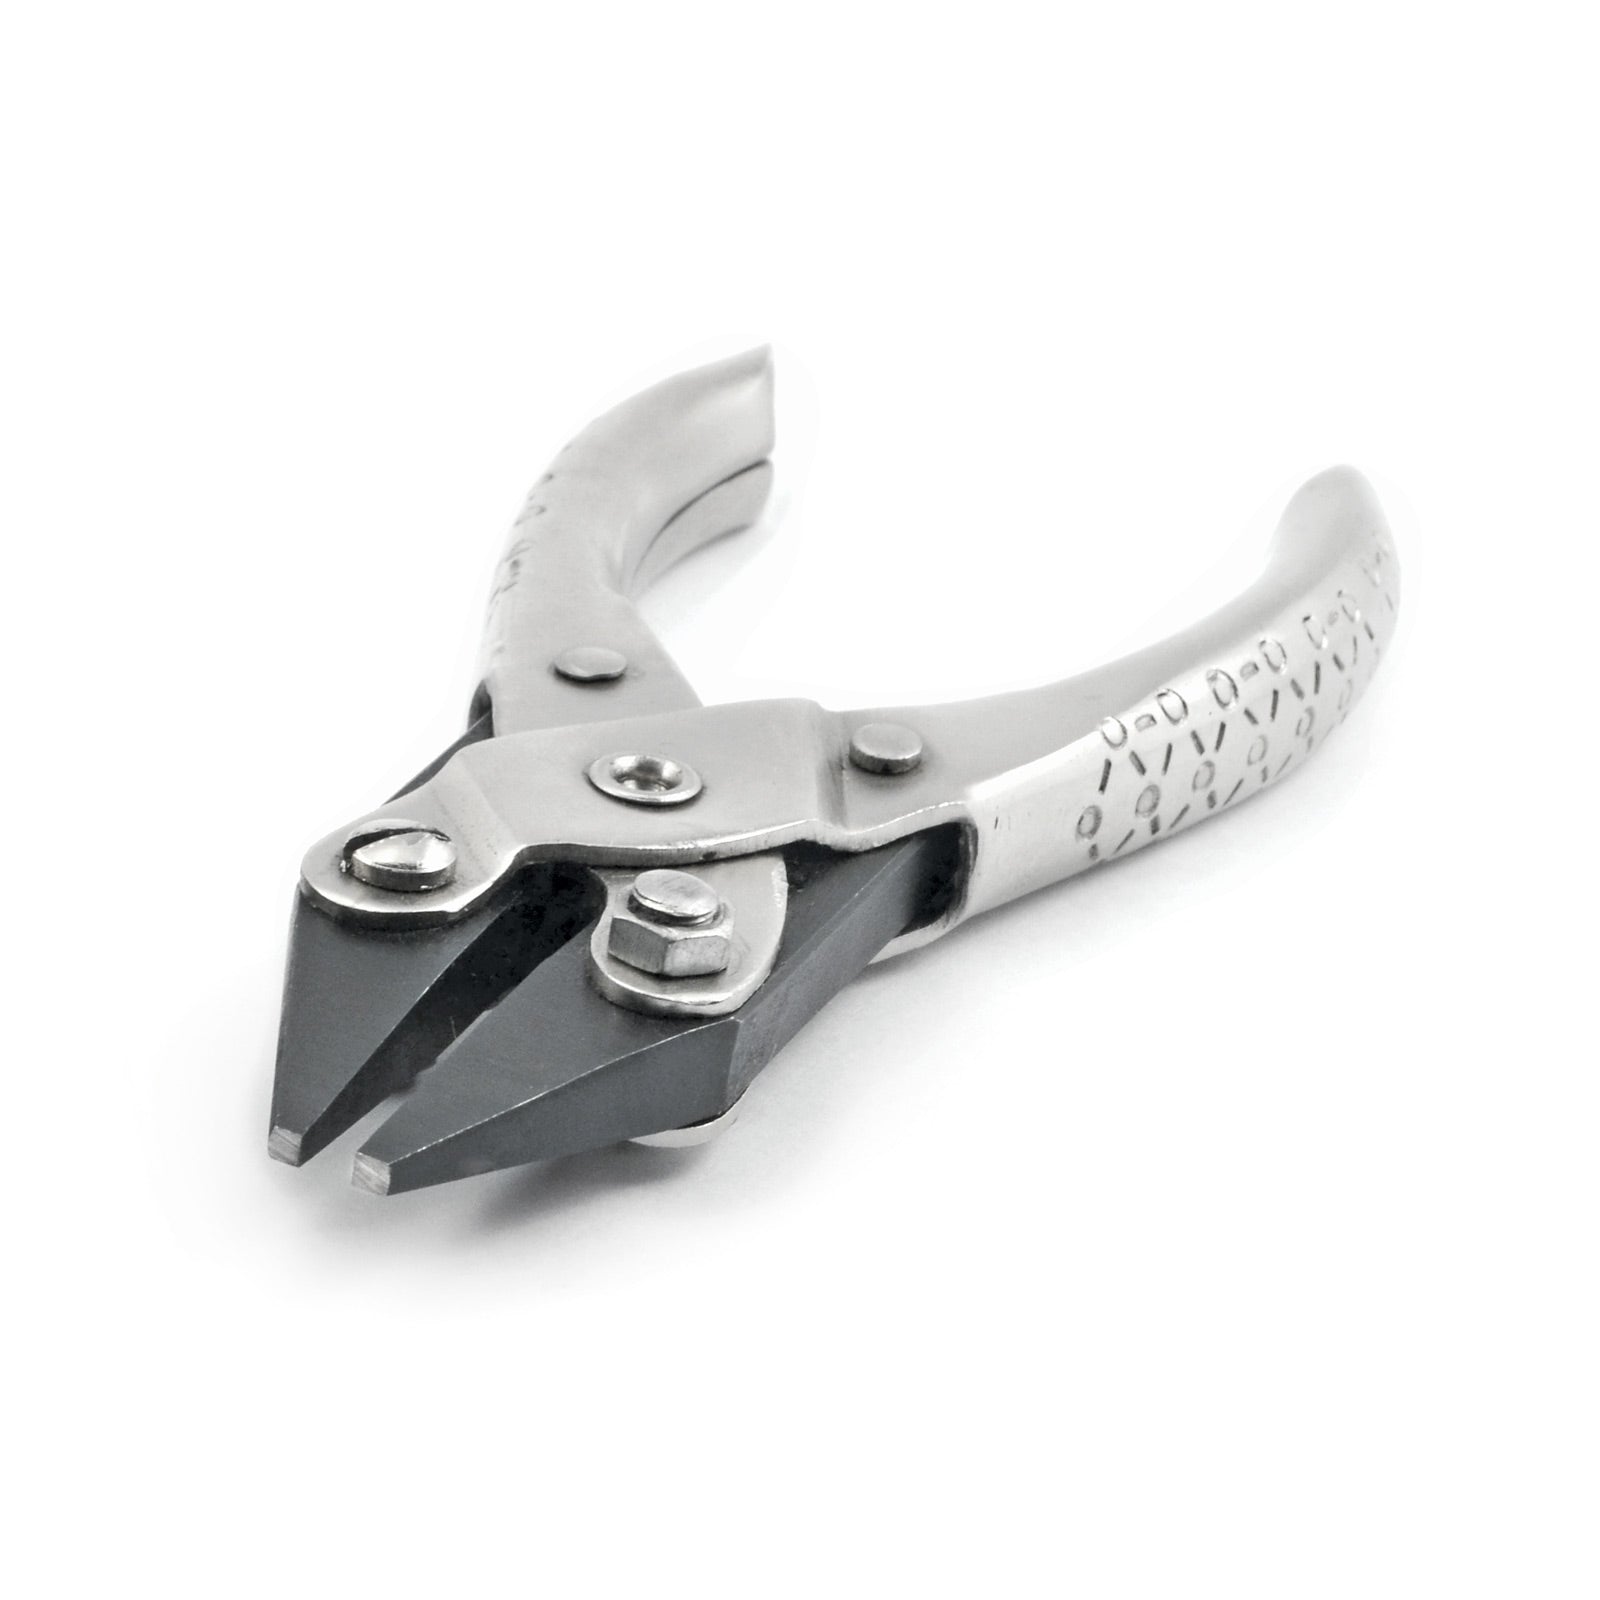 Parallel Jaw Plier, Chain Nose with Tapered Jaws